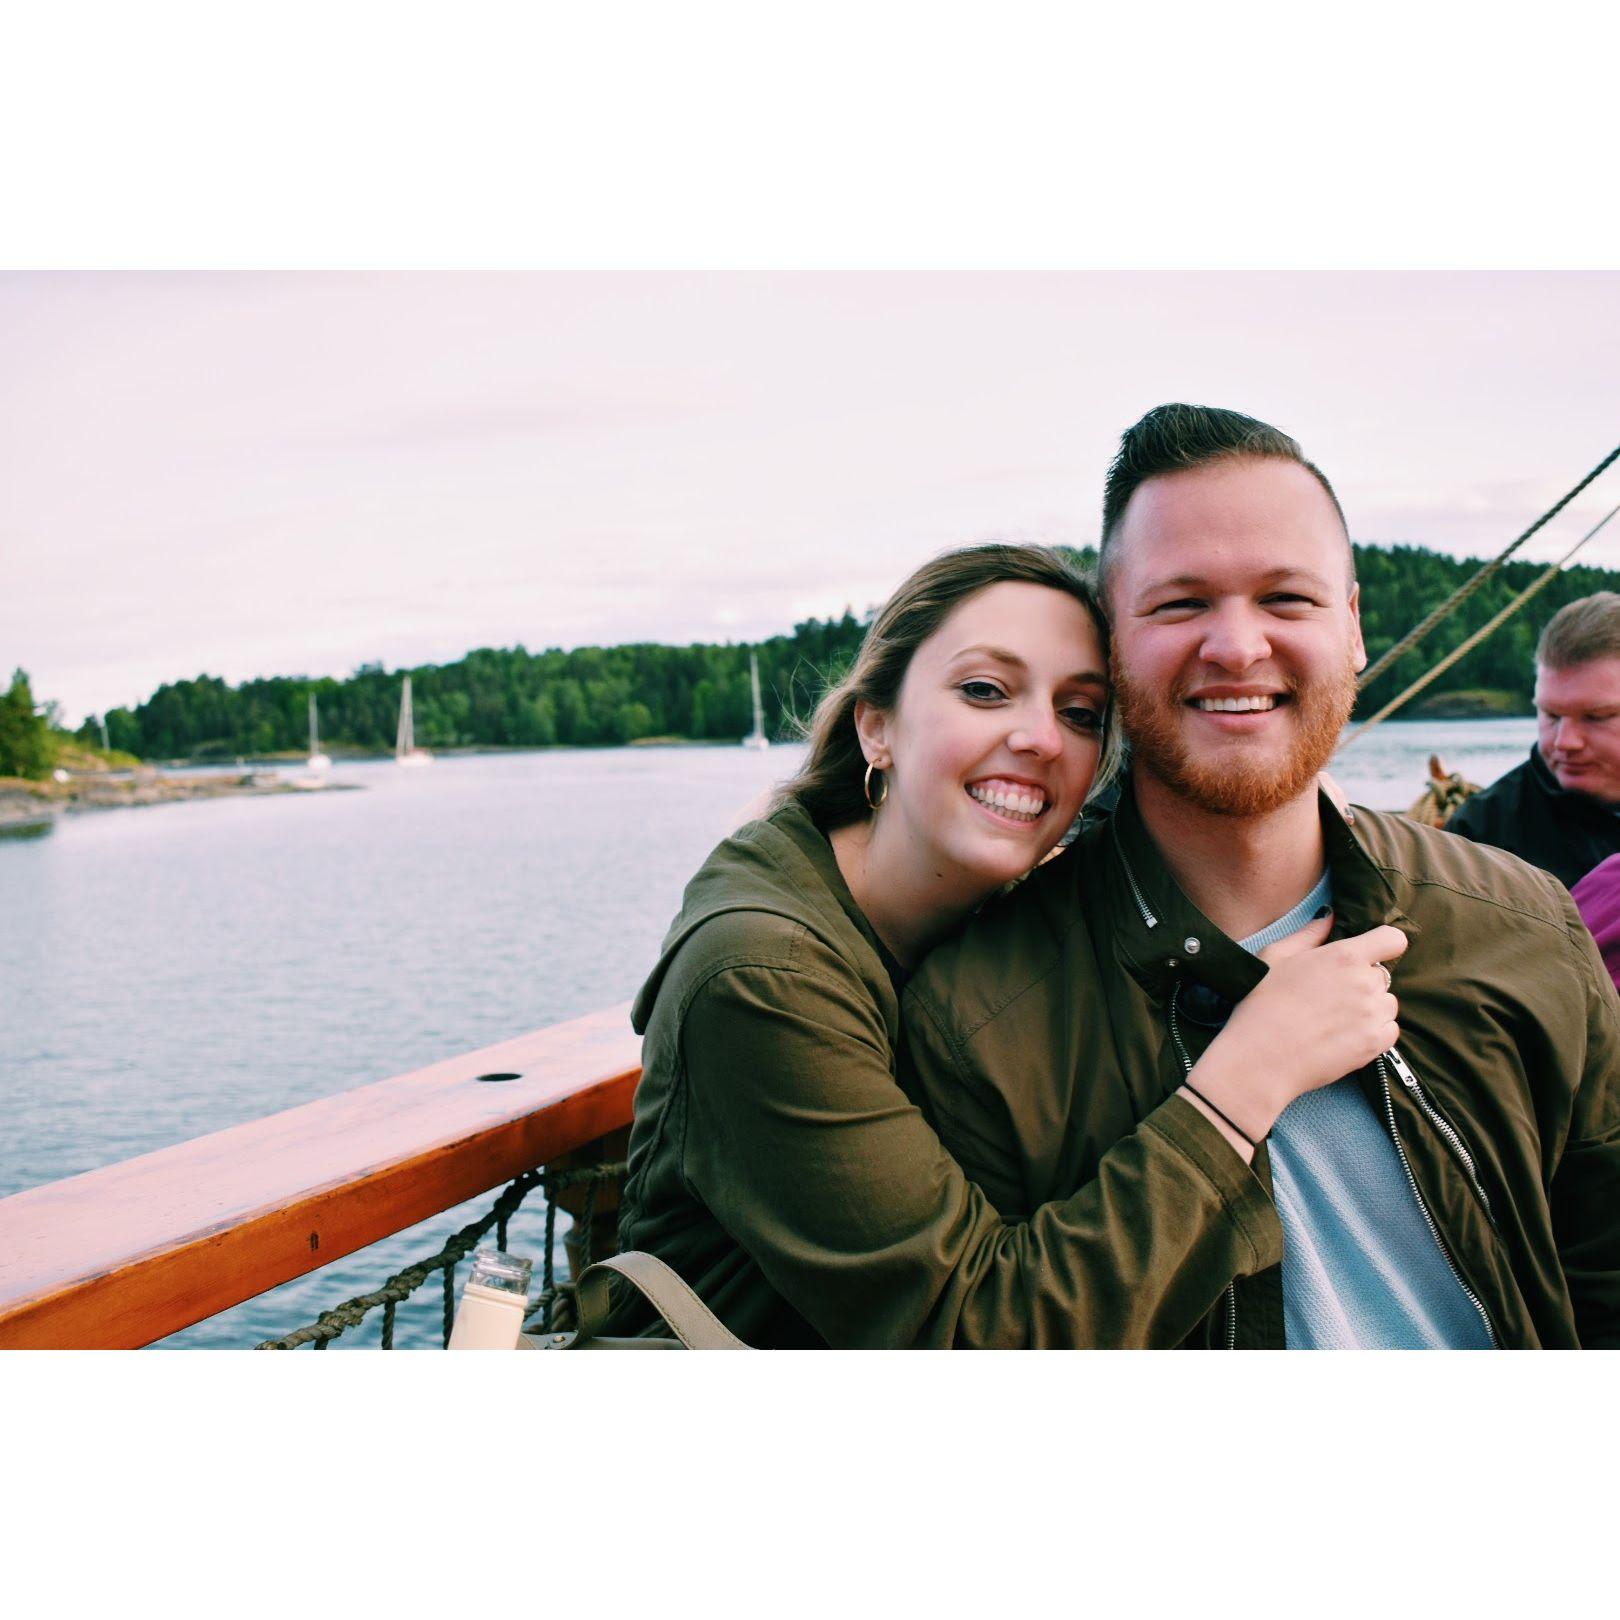 Norway was another of our favorite spots - s/o to Rick Steves for the great travel tips here.